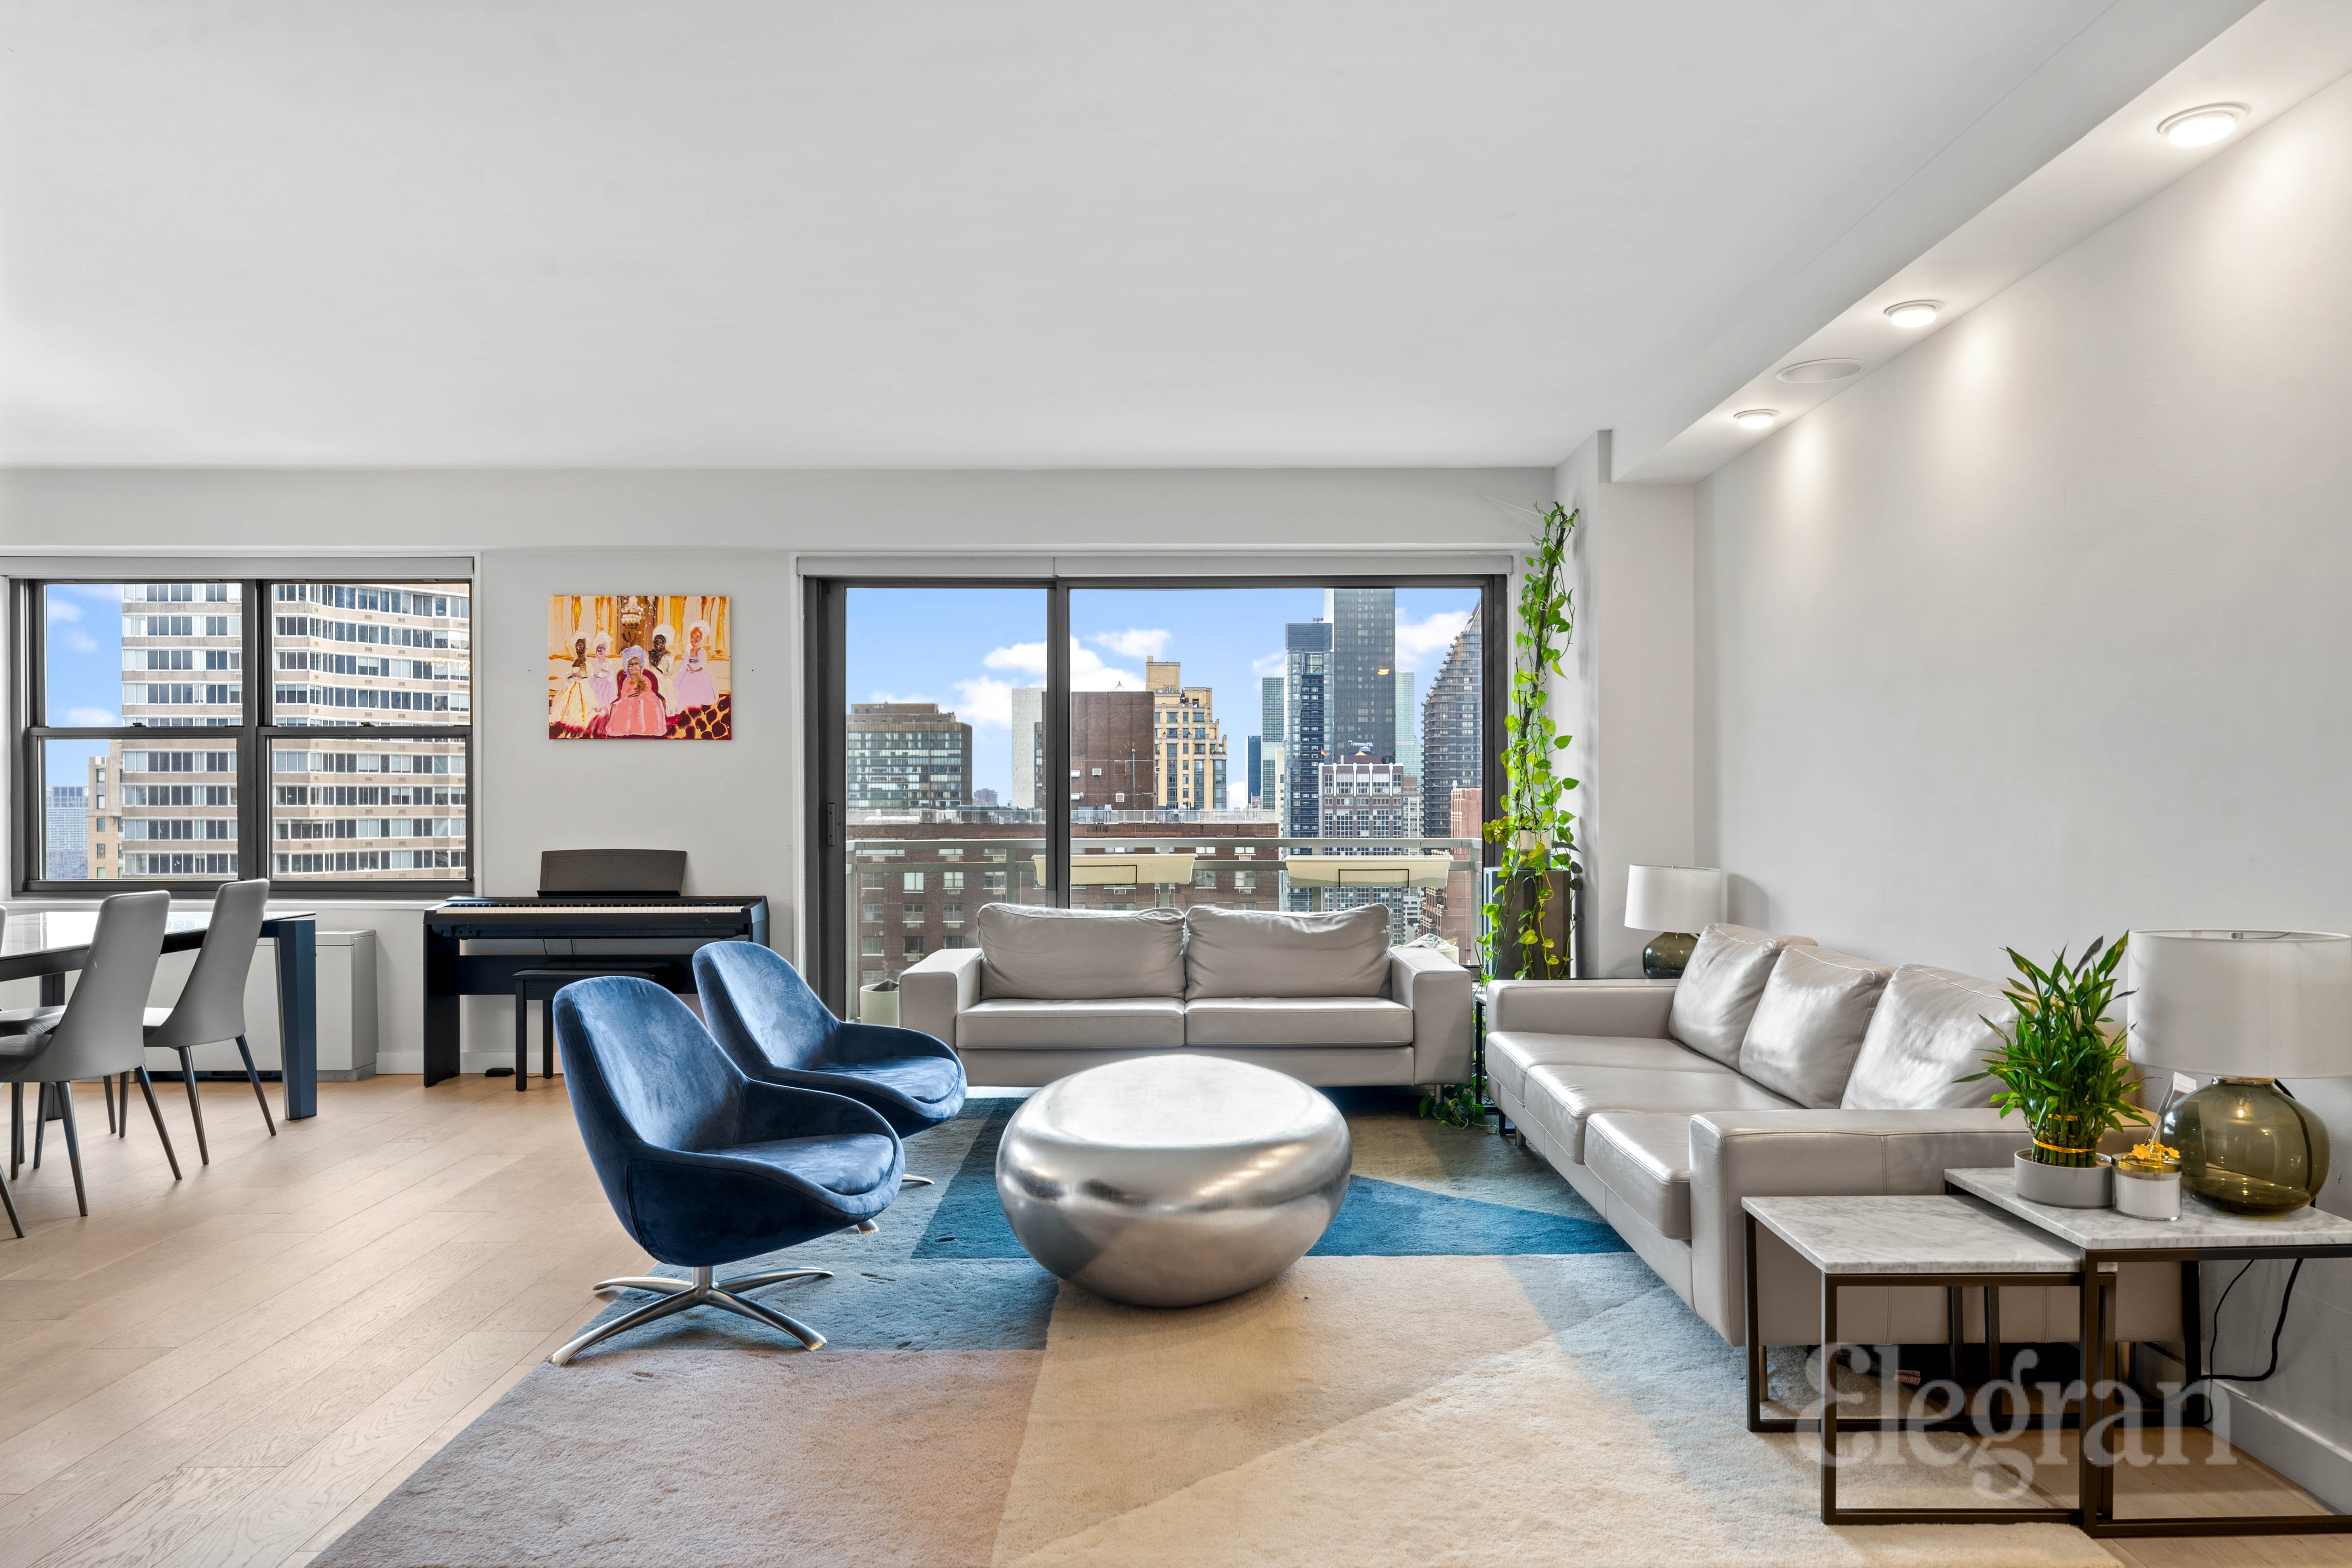 400 East 56th Street 31-Ab, Sutton Place, Midtown East, NYC - 3 Bedrooms  
3 Bathrooms  
8 Rooms - 